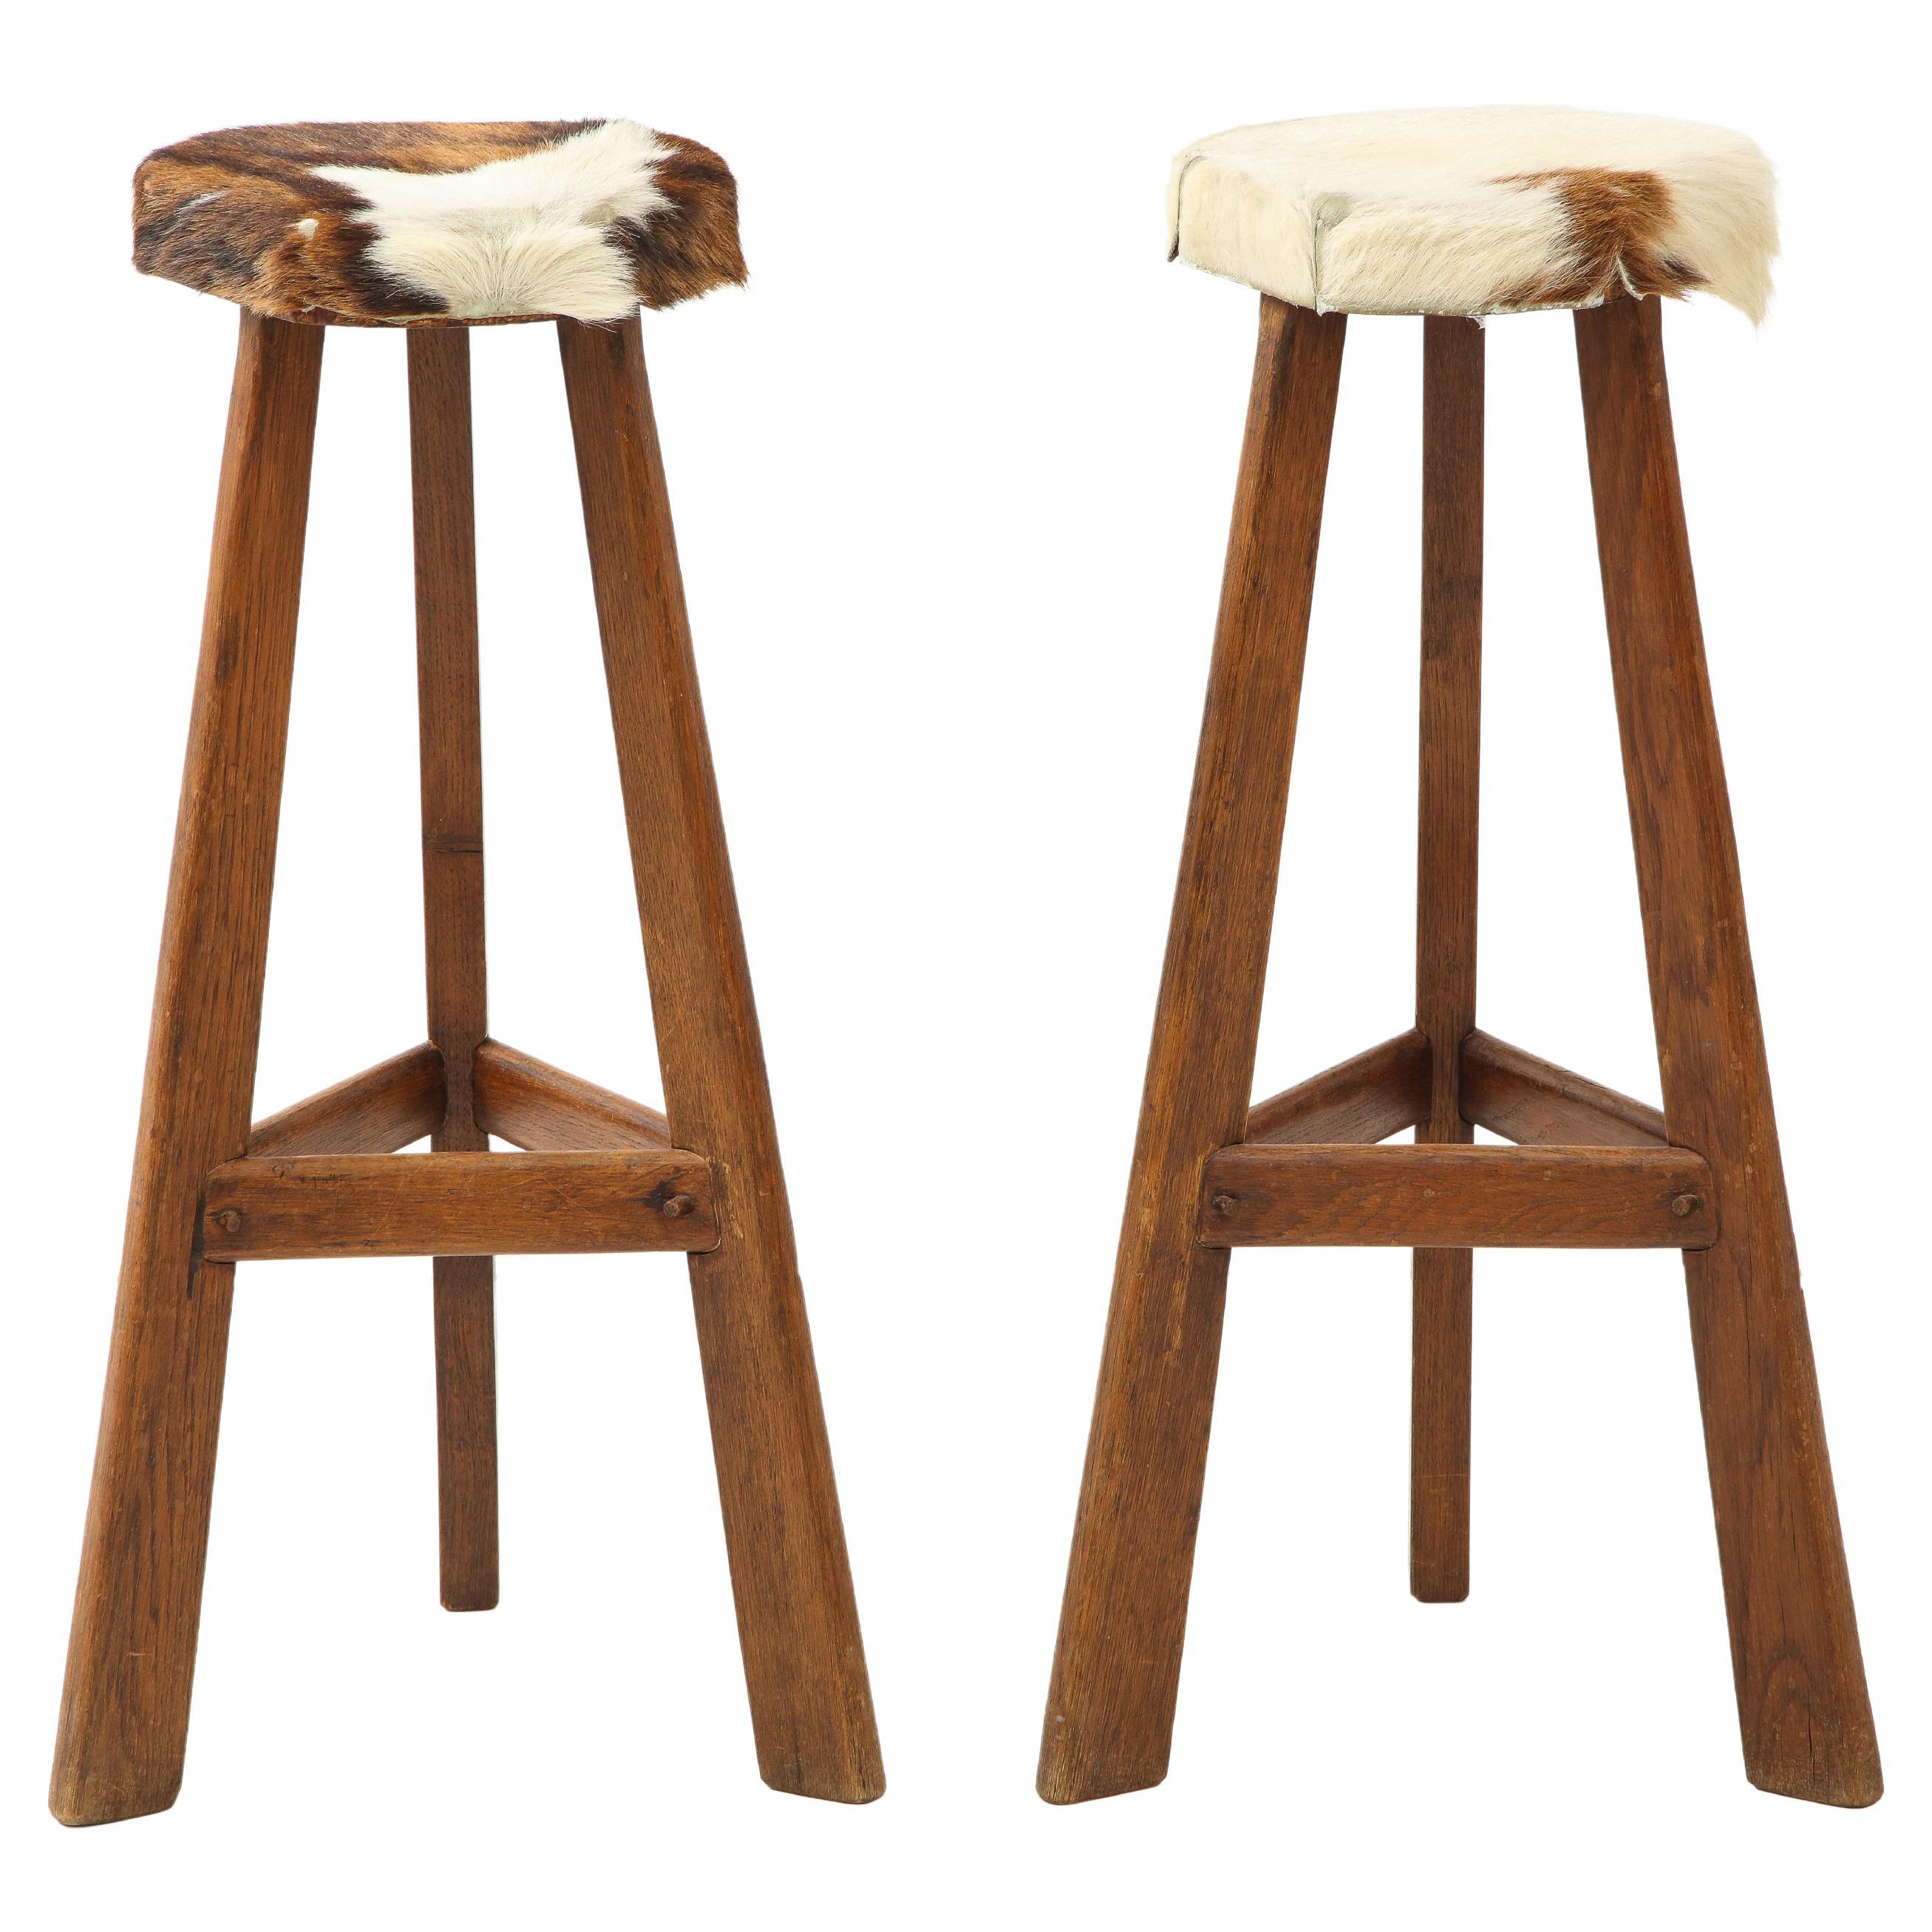 Pair of Midcentury Stools with Cowhide Seats, France, circa 1960 For Sale